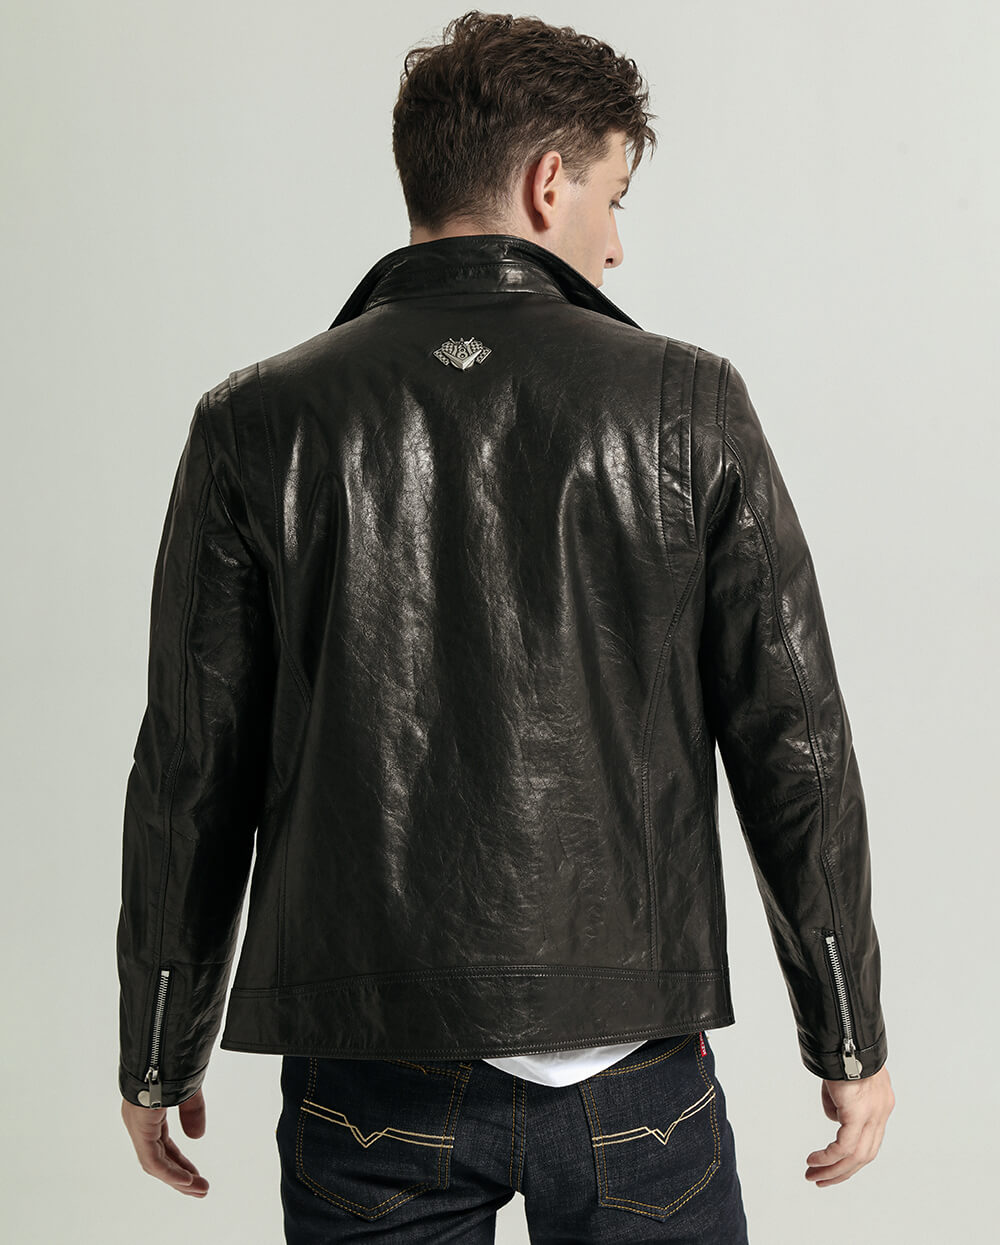 Vegetable Tanned Goatskin Moto Jacket with Adjustable Zippered Cuff